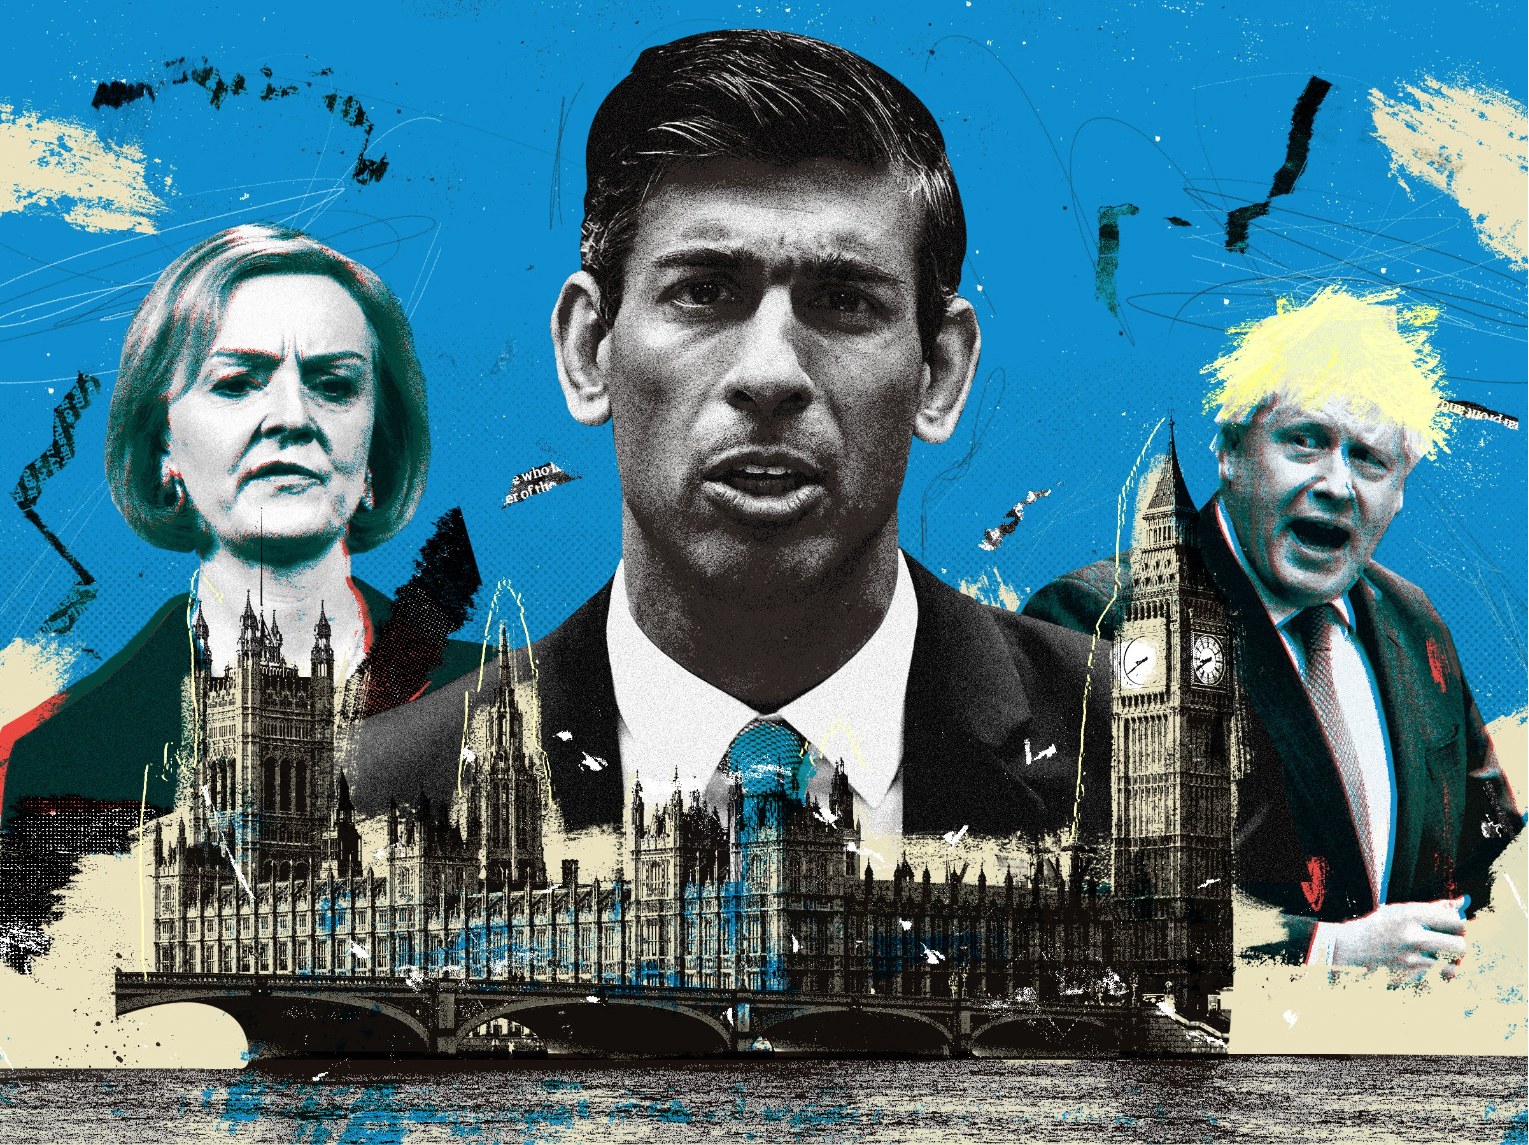 Photo illustration by Nate Kitch for The Wall Street Journal; art direction Pia Peterson Haggarty“Don’t Blame the Parliamentary System for Britain’s Woes”